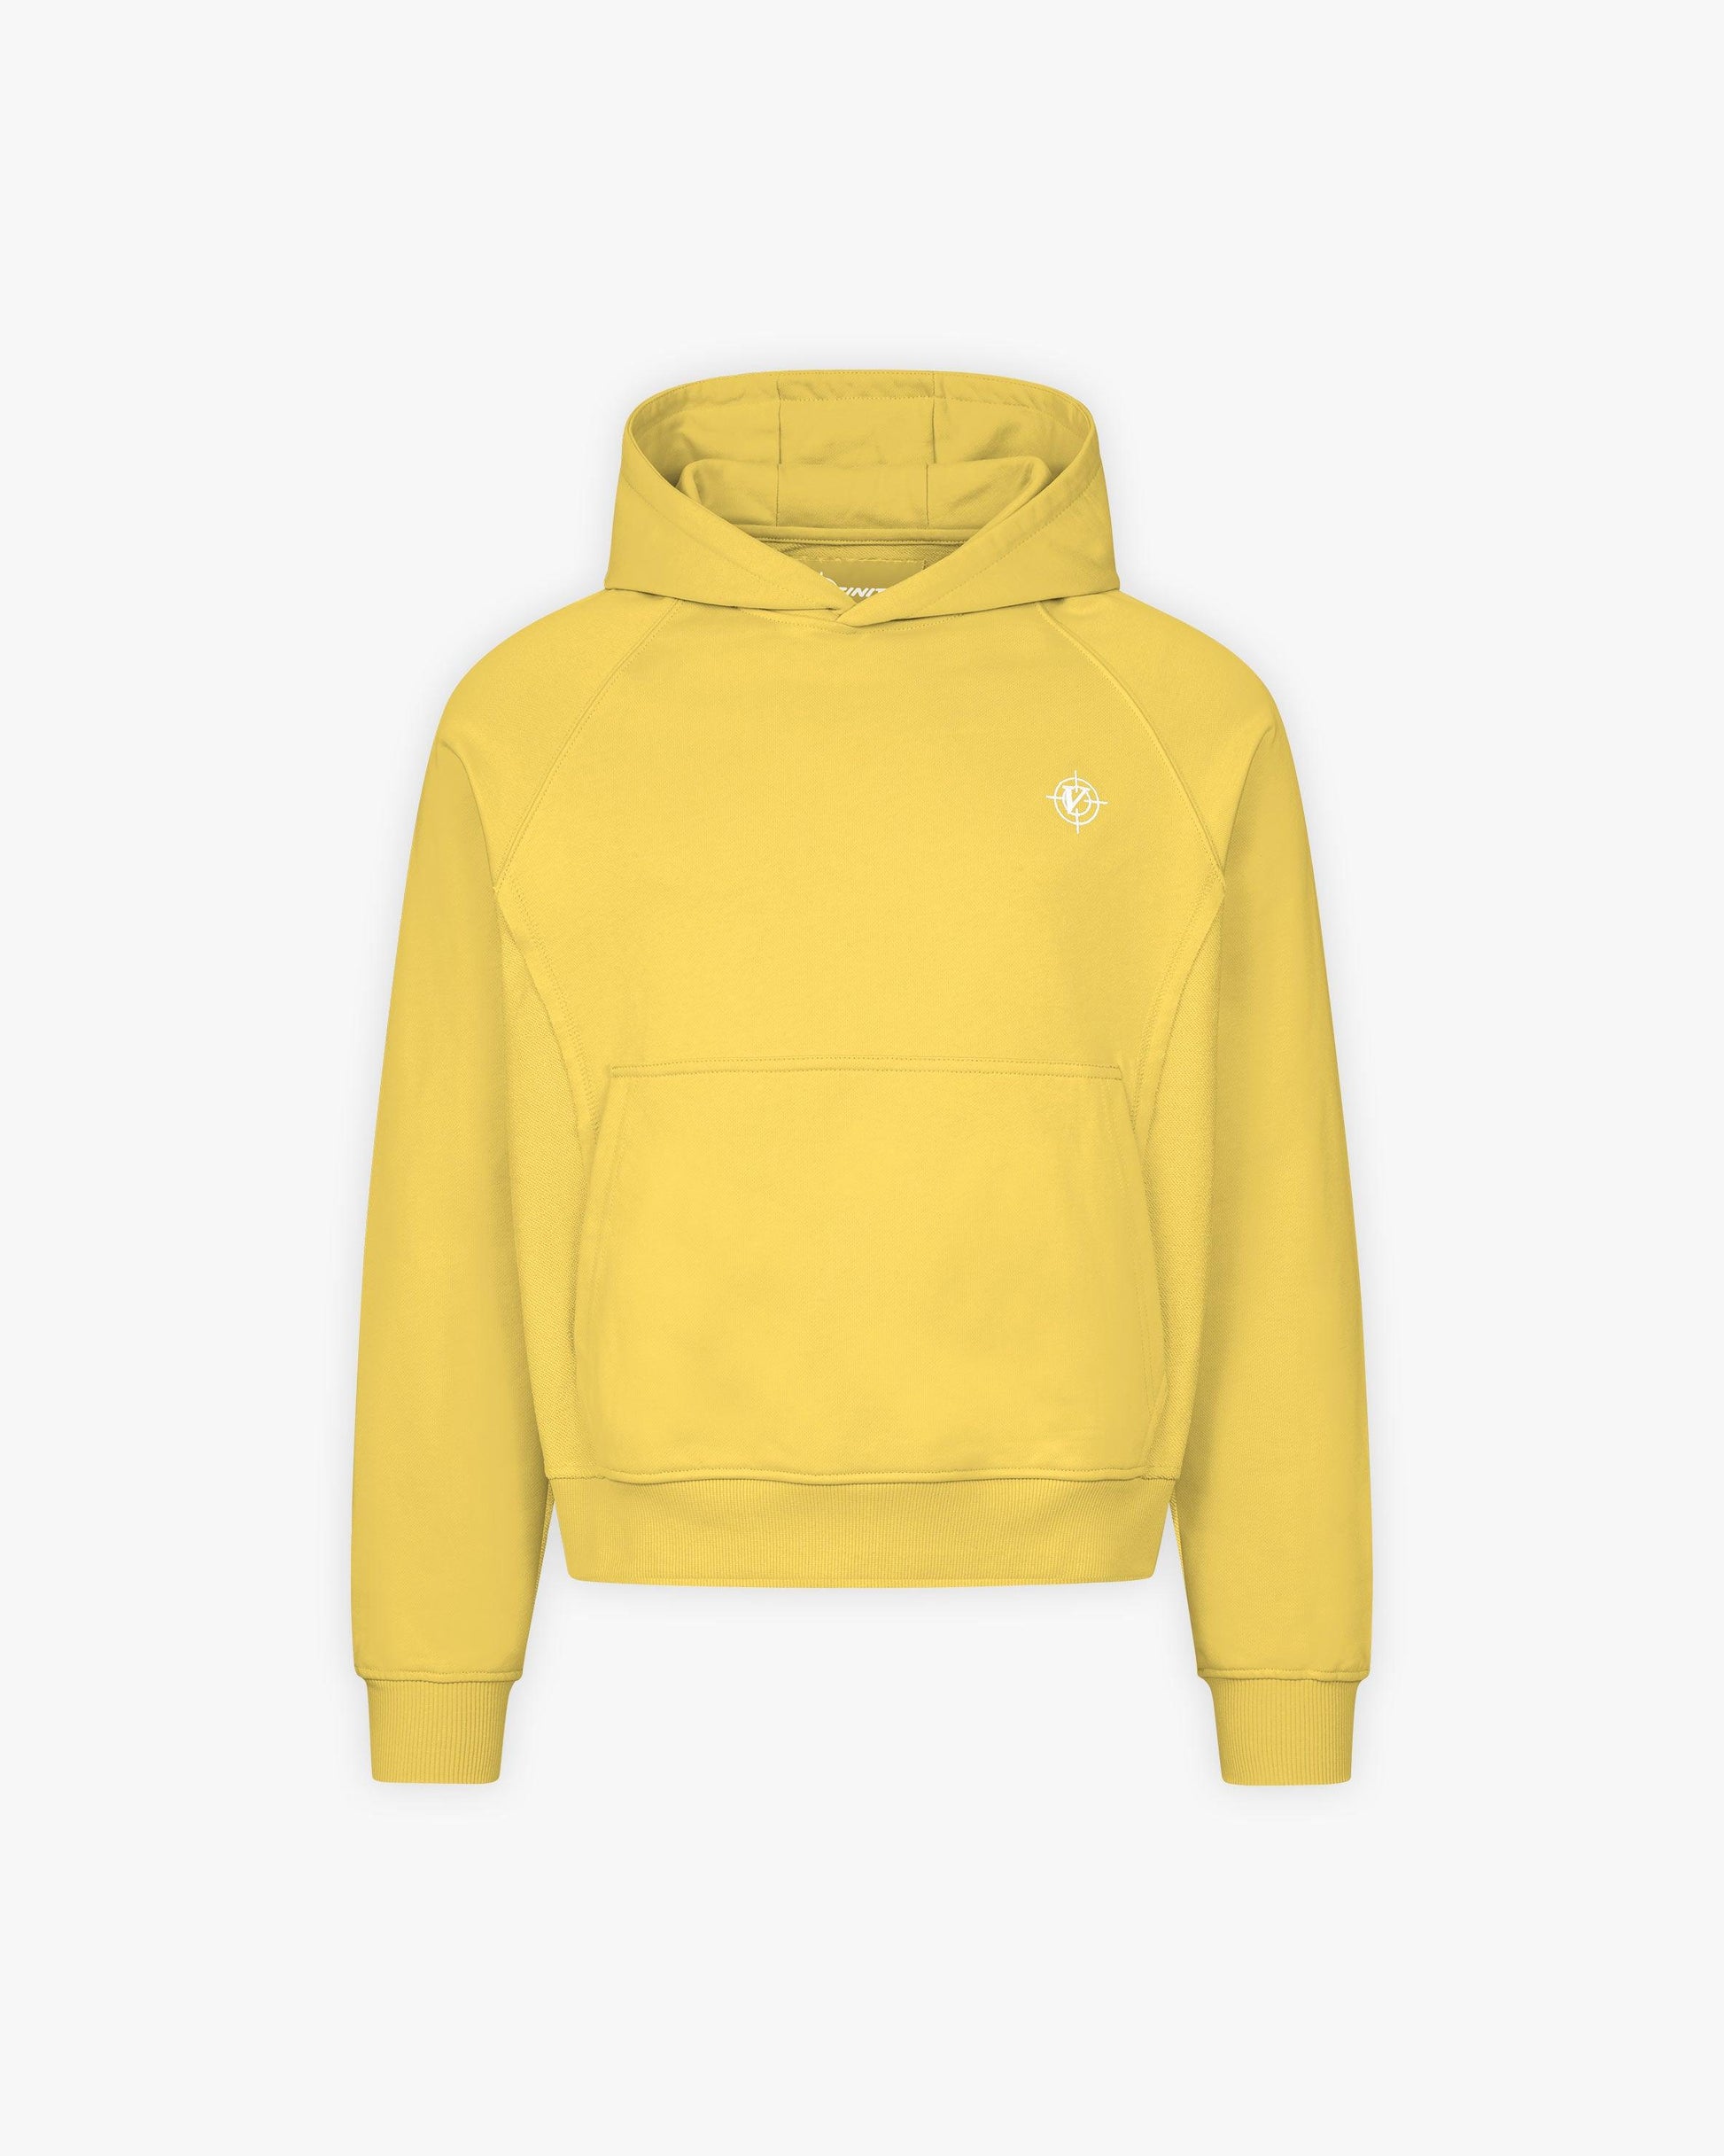 INSIDE OUT HOODIE SUNFLOWER - VICINITY